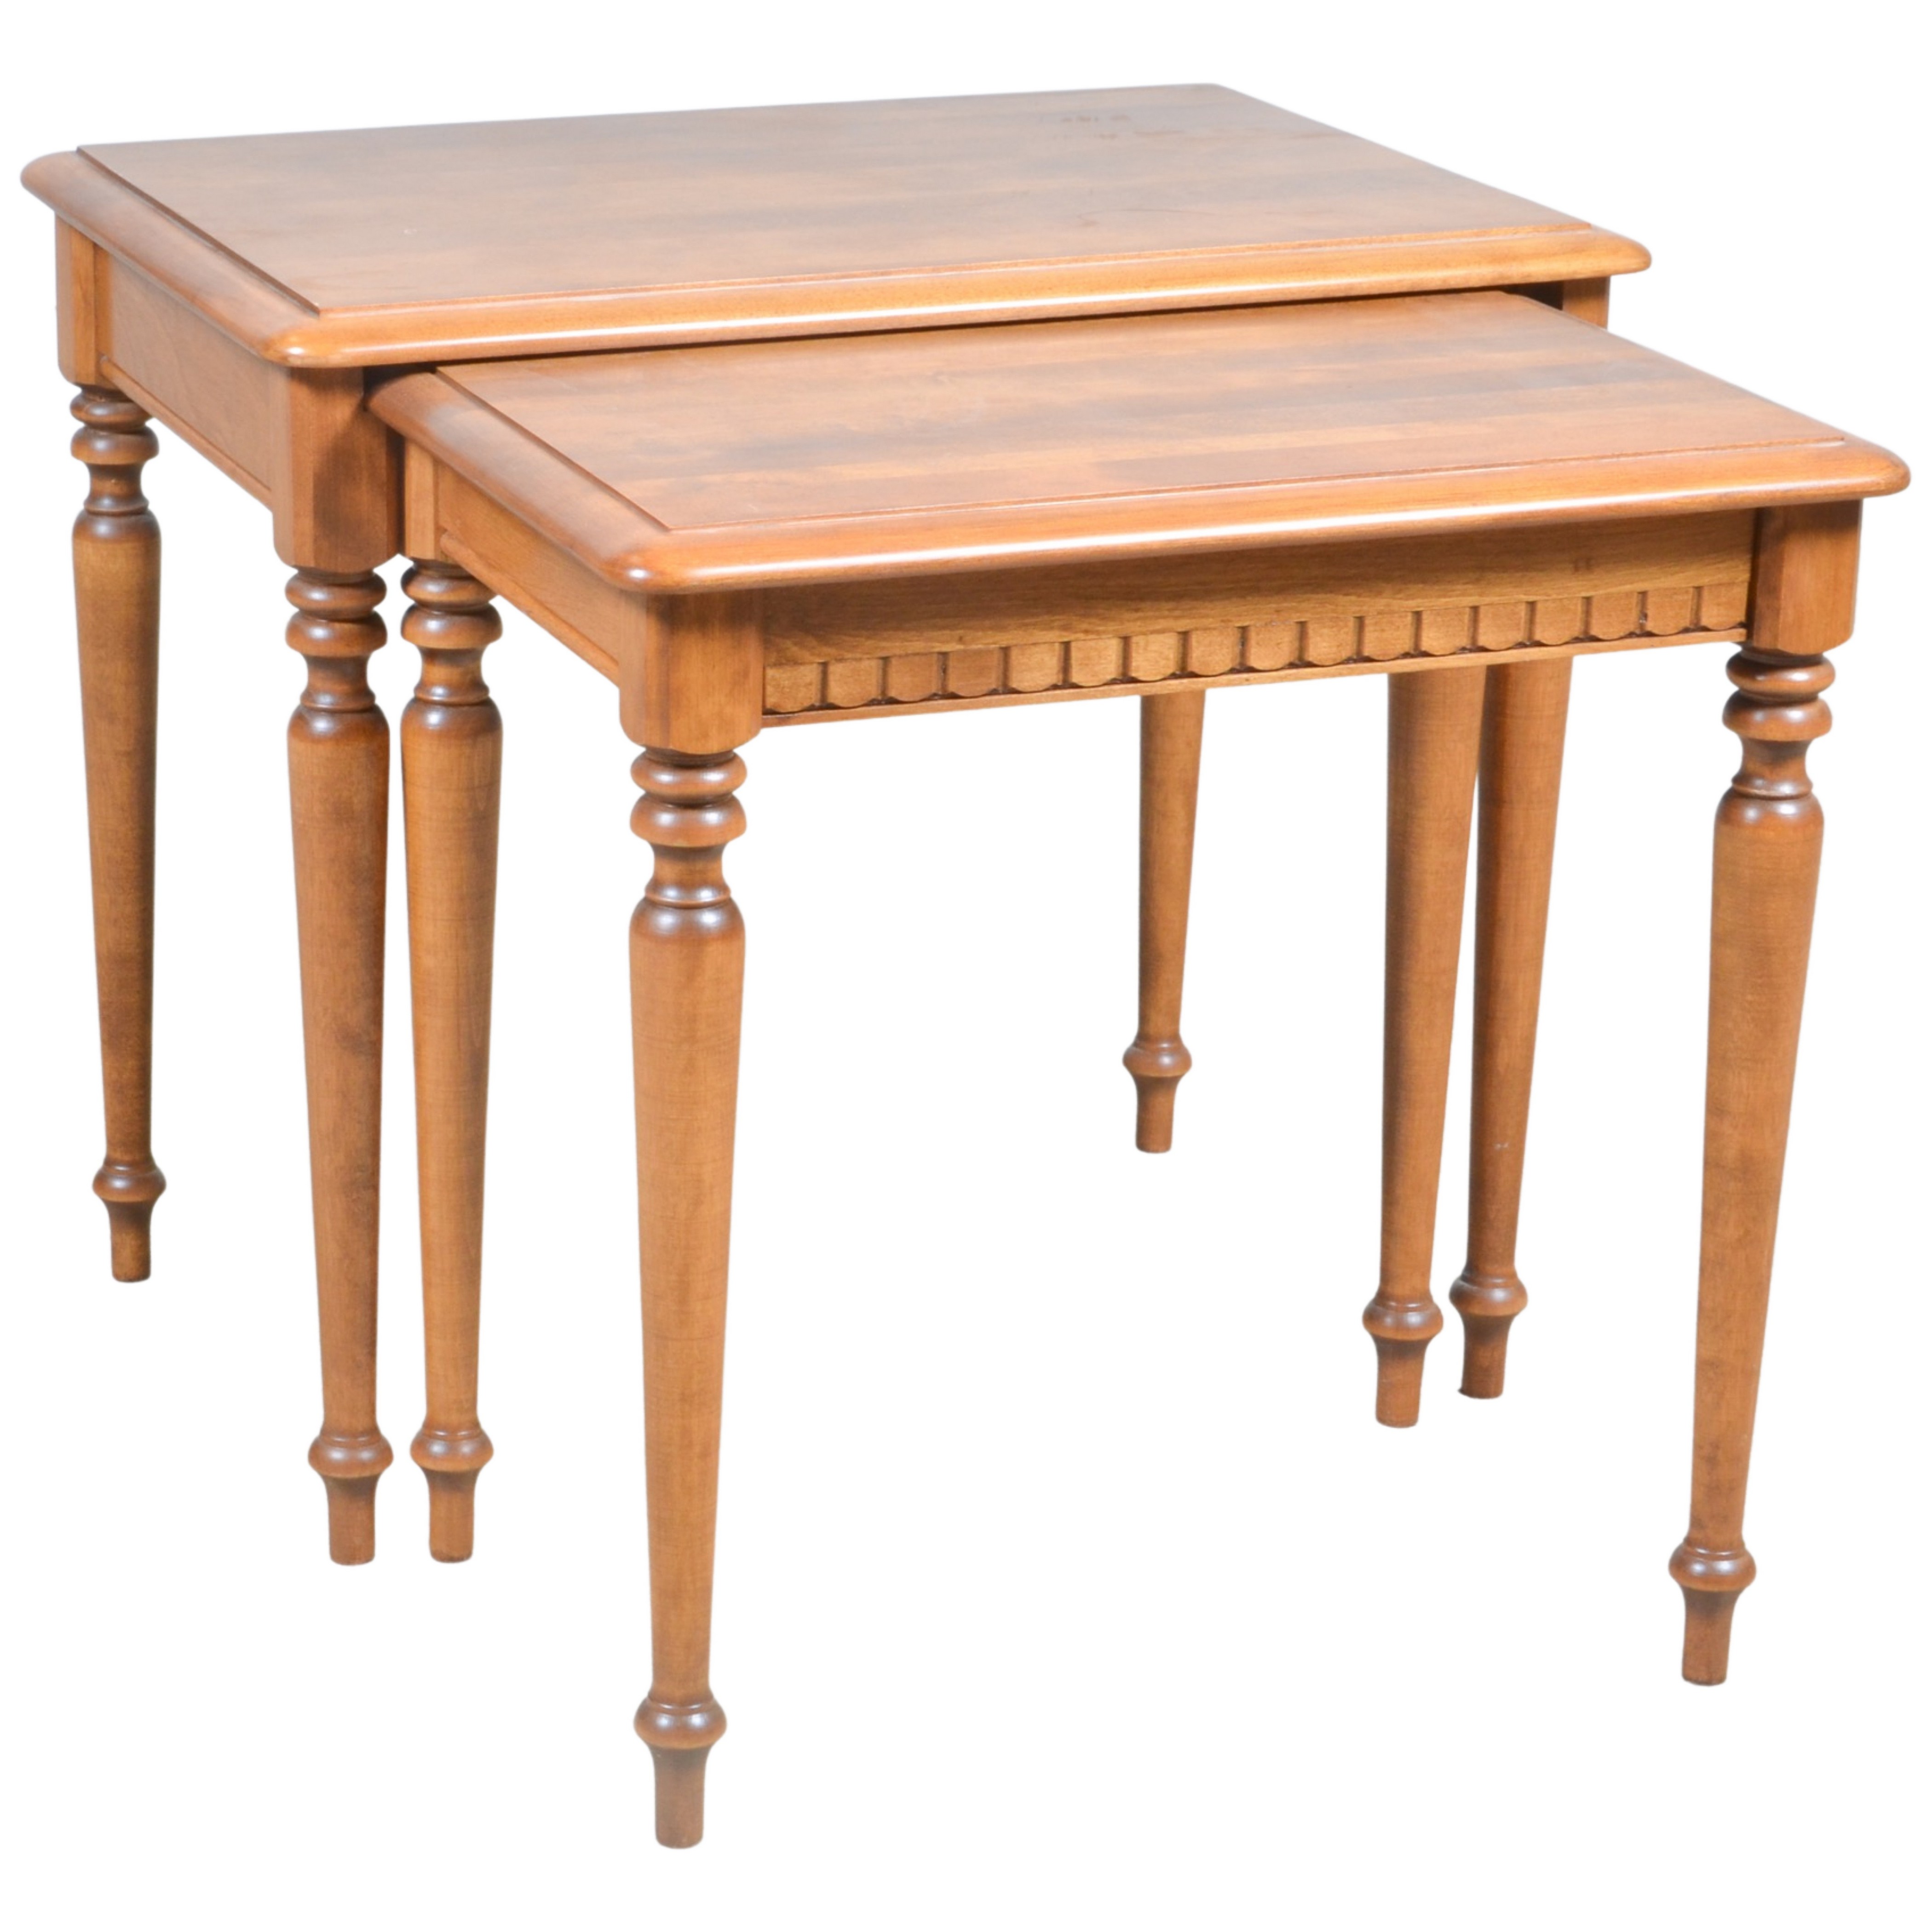 Ethan Allen nesting tables, turned tapered